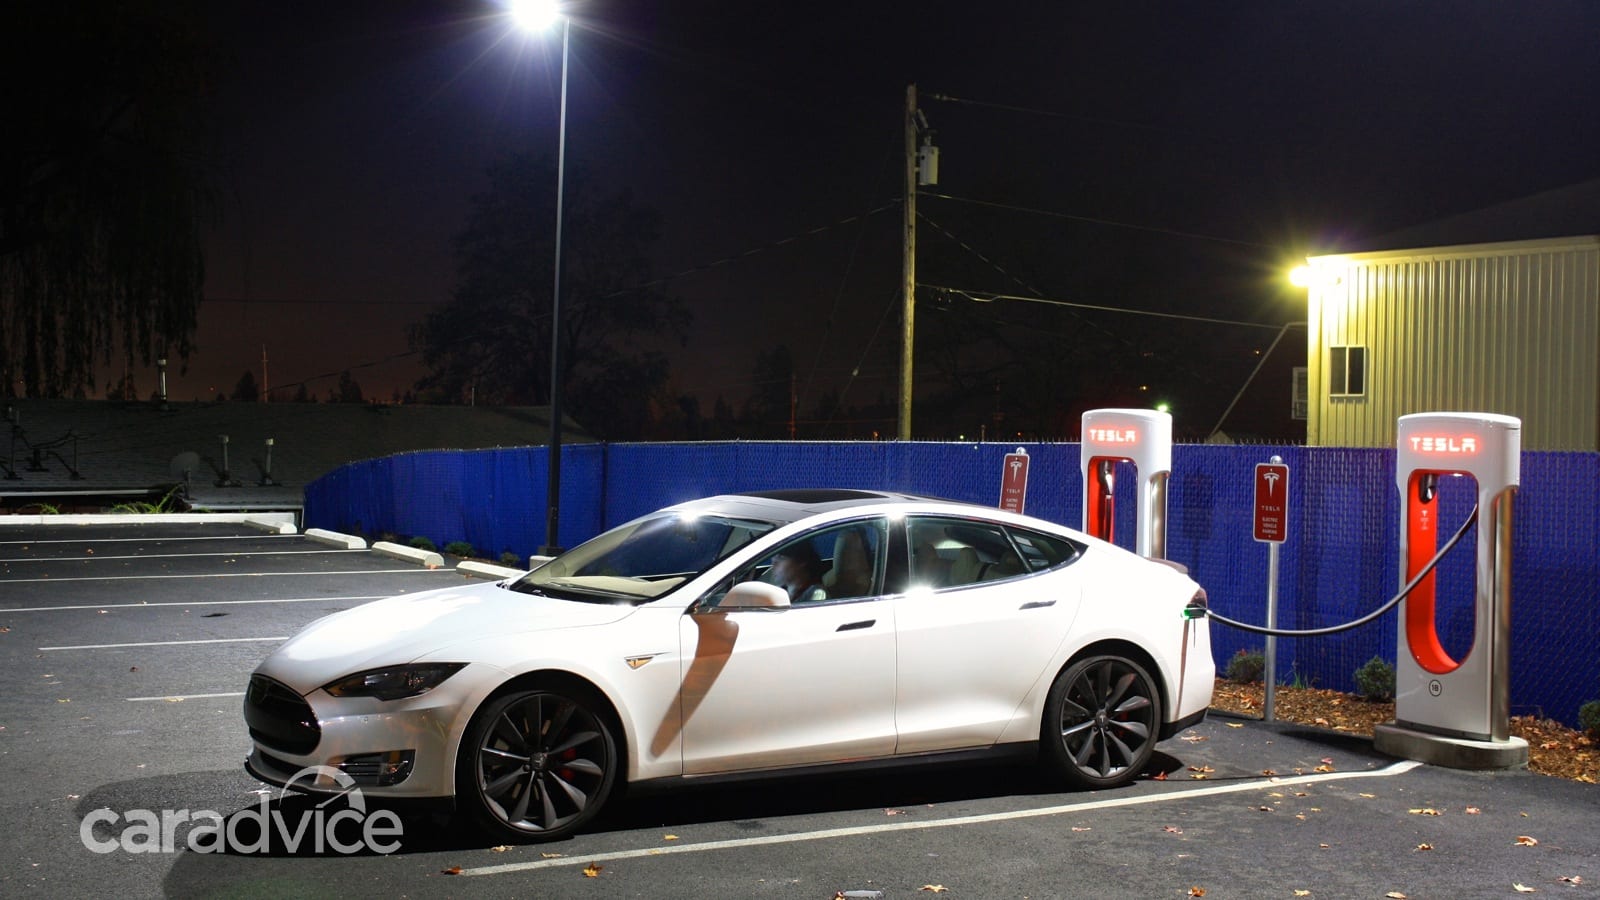 Tesla Model S road trip can an electric car do longdistance driving